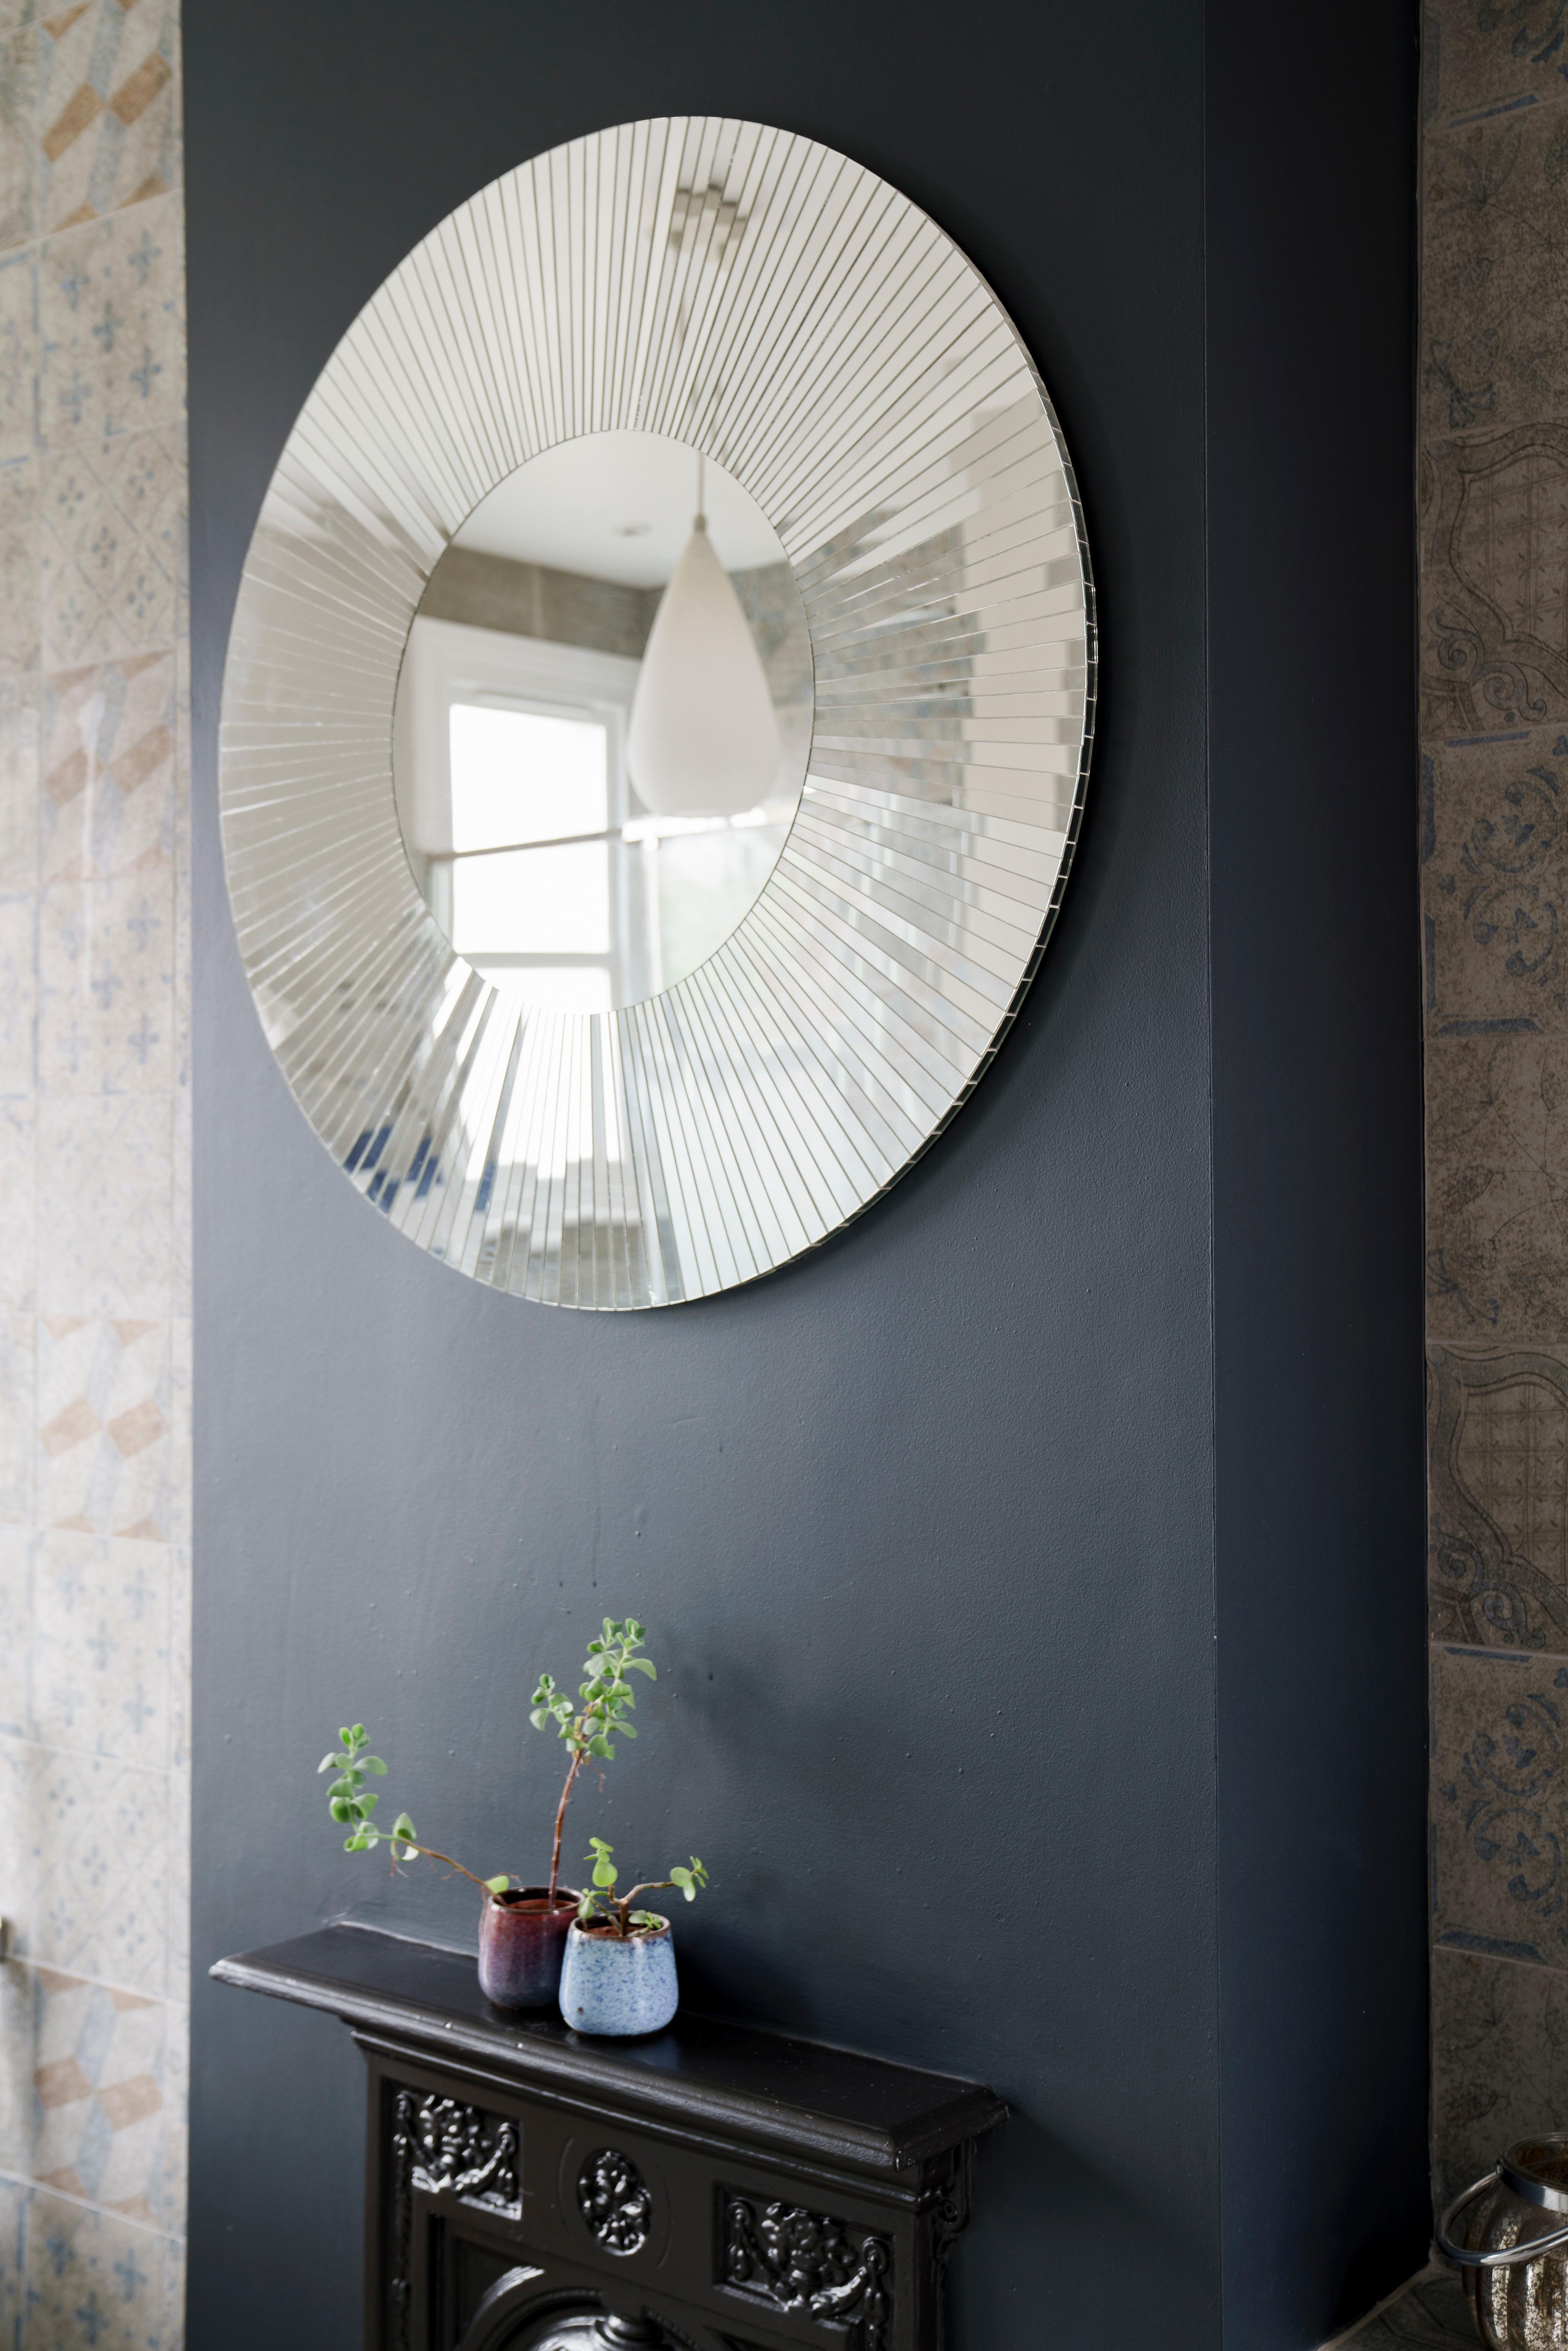 The circular Sunray mosaic mirror handmade in UK by Claire Nayman. Each piece of mirror has been individually handcut creating beautiful reflections and a unique finish. The Frame and central mirror sit flush with each other and this mirror has a